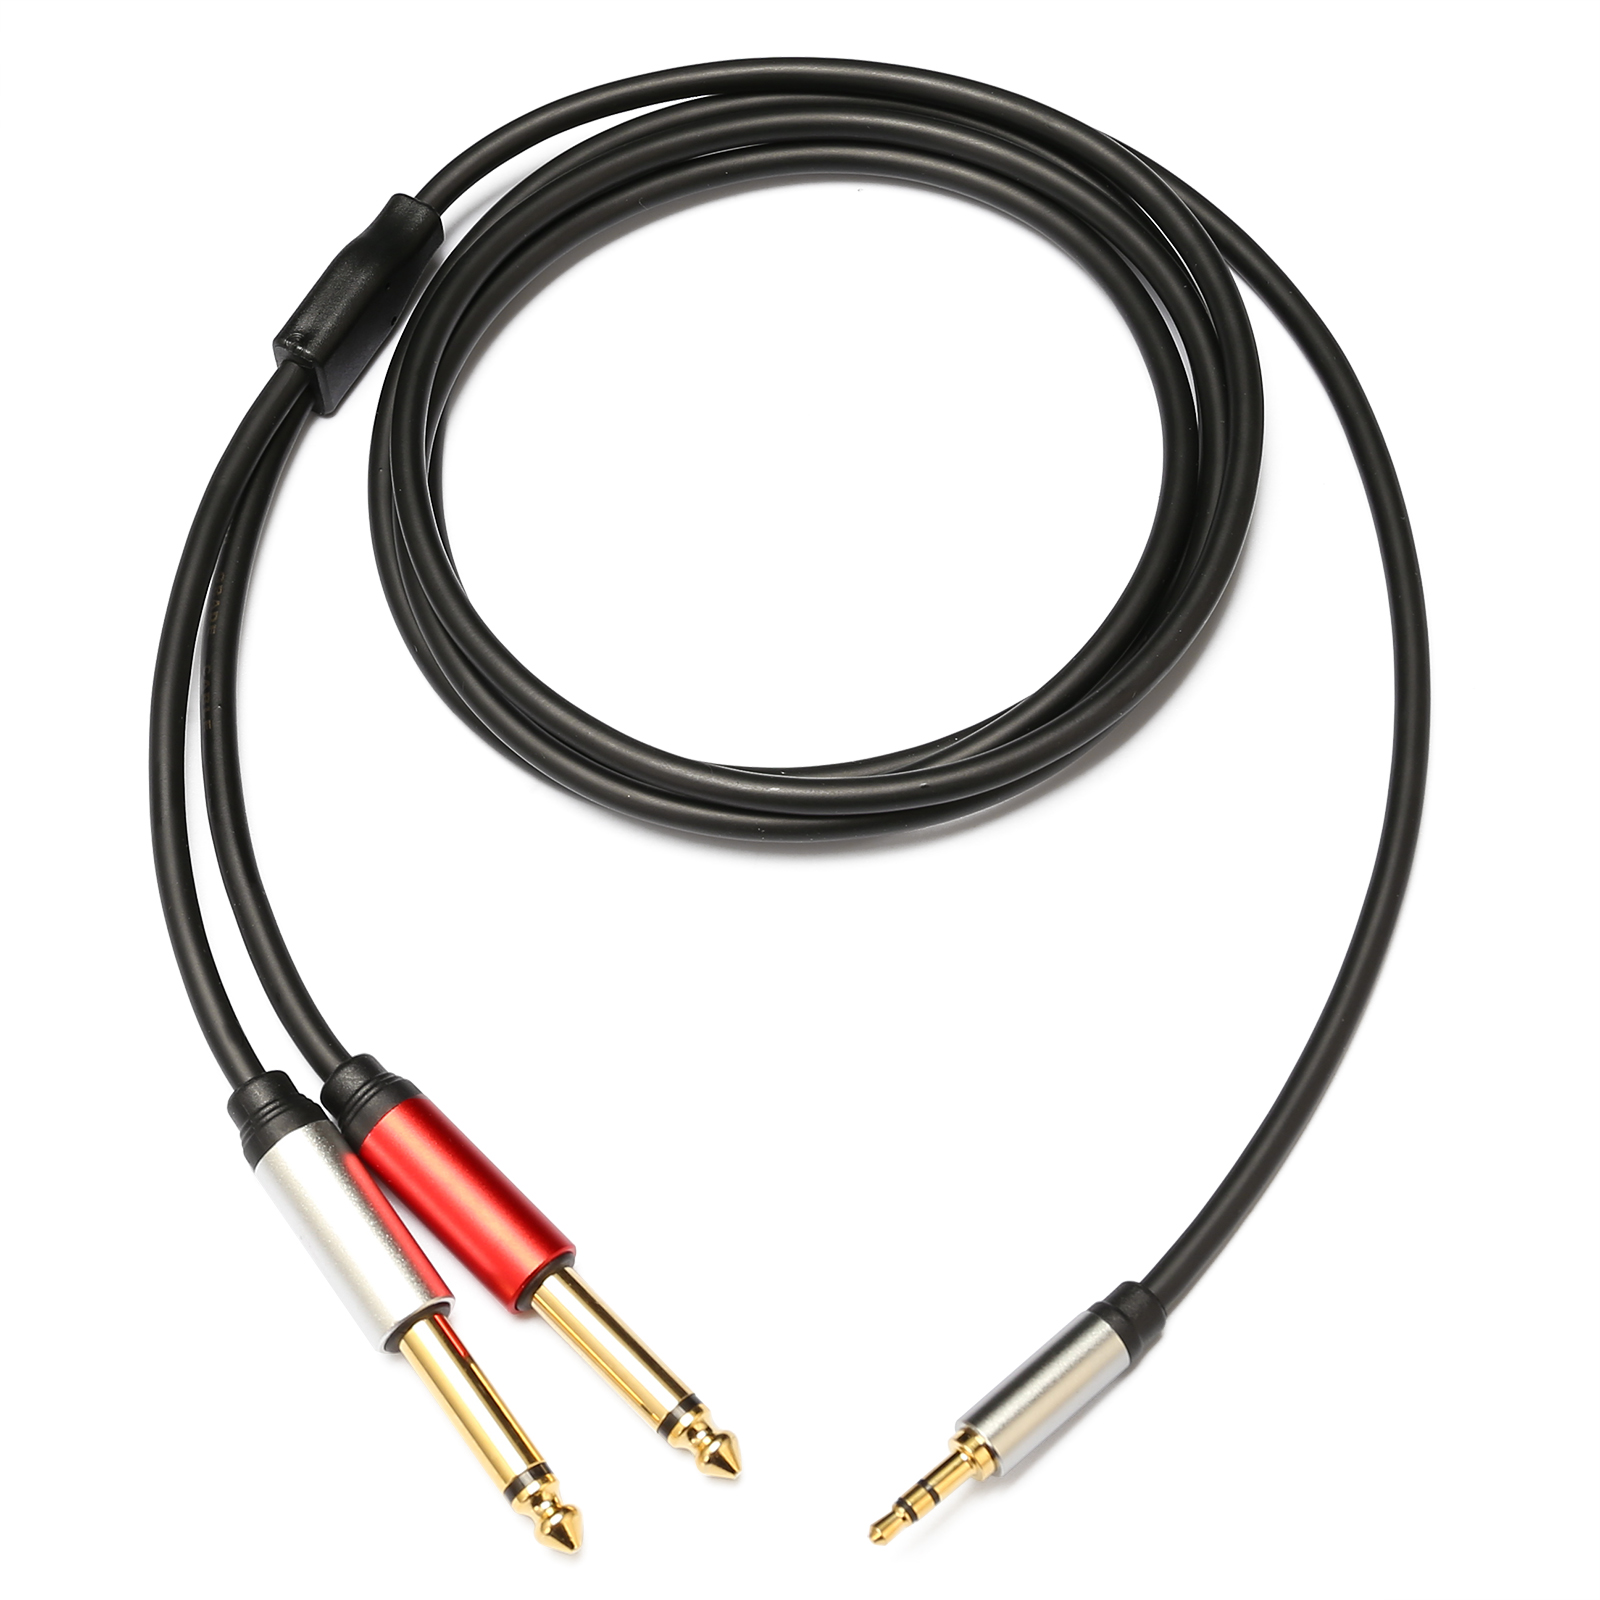 3.5 to dual 6.35 one to two adapter audio cable